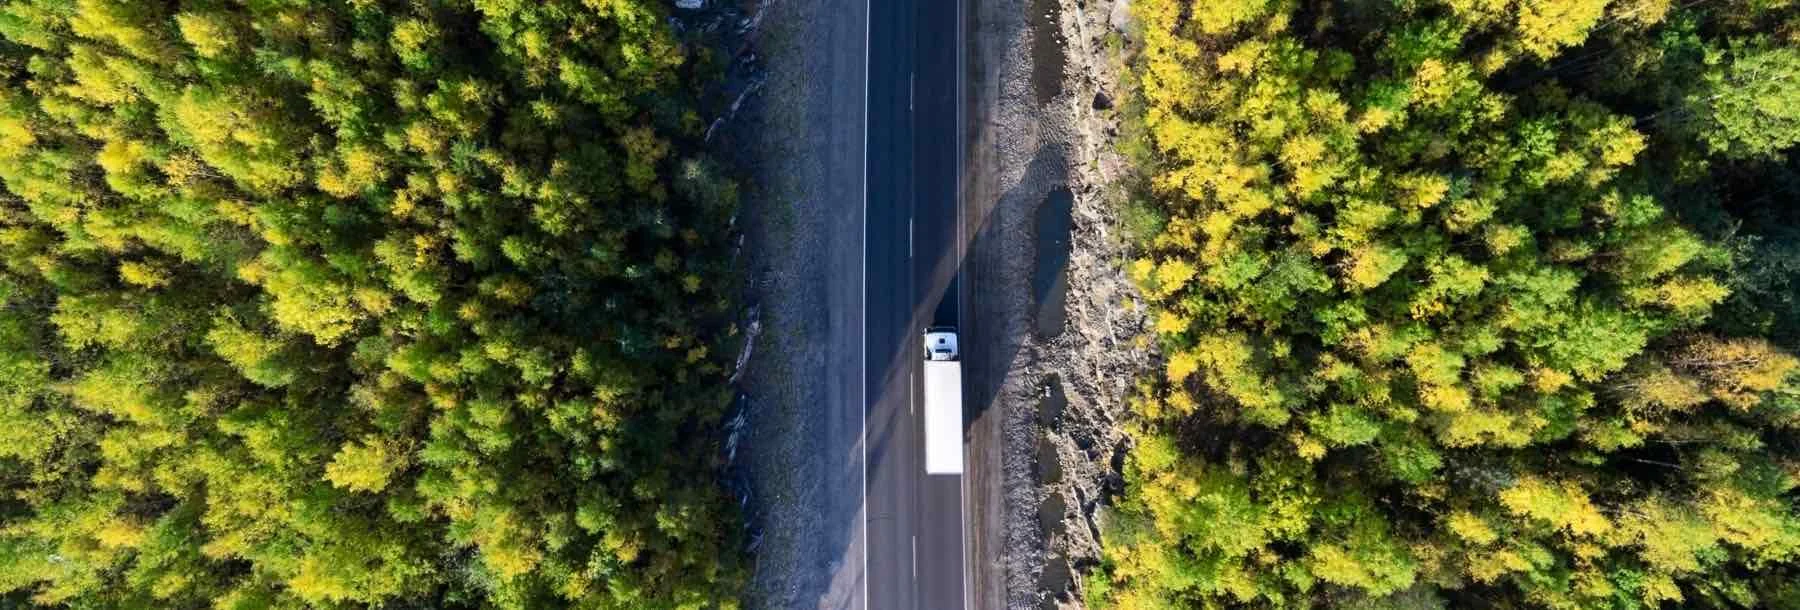 truck on freeway in the forest